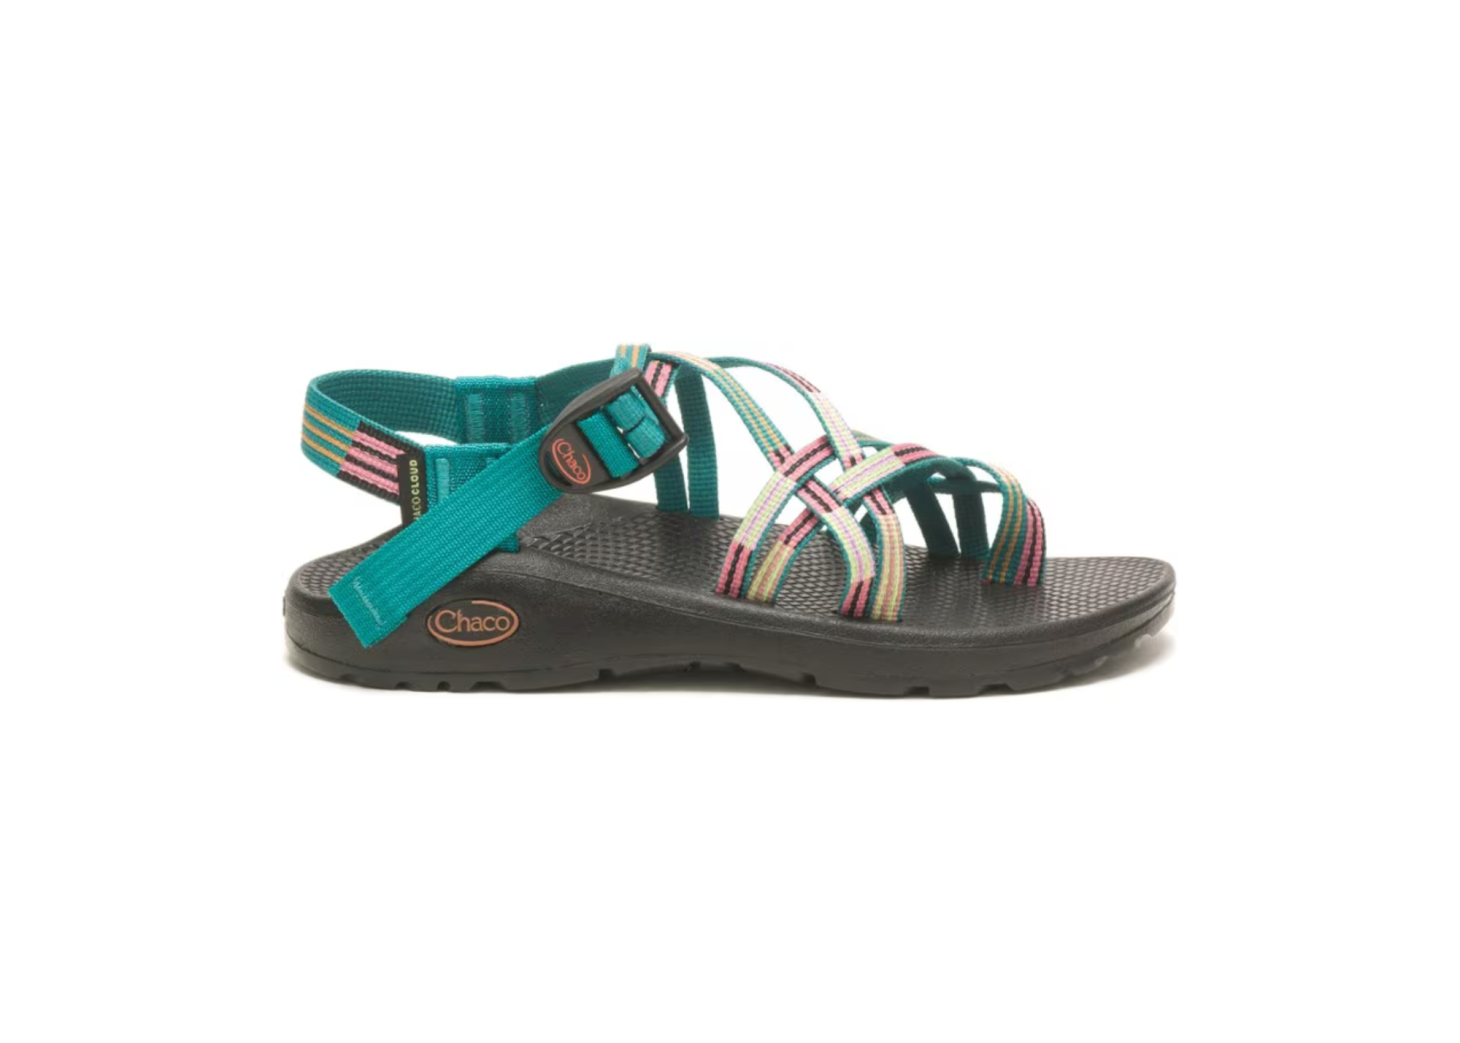 Chaco ZX_2 Cloud Sandals